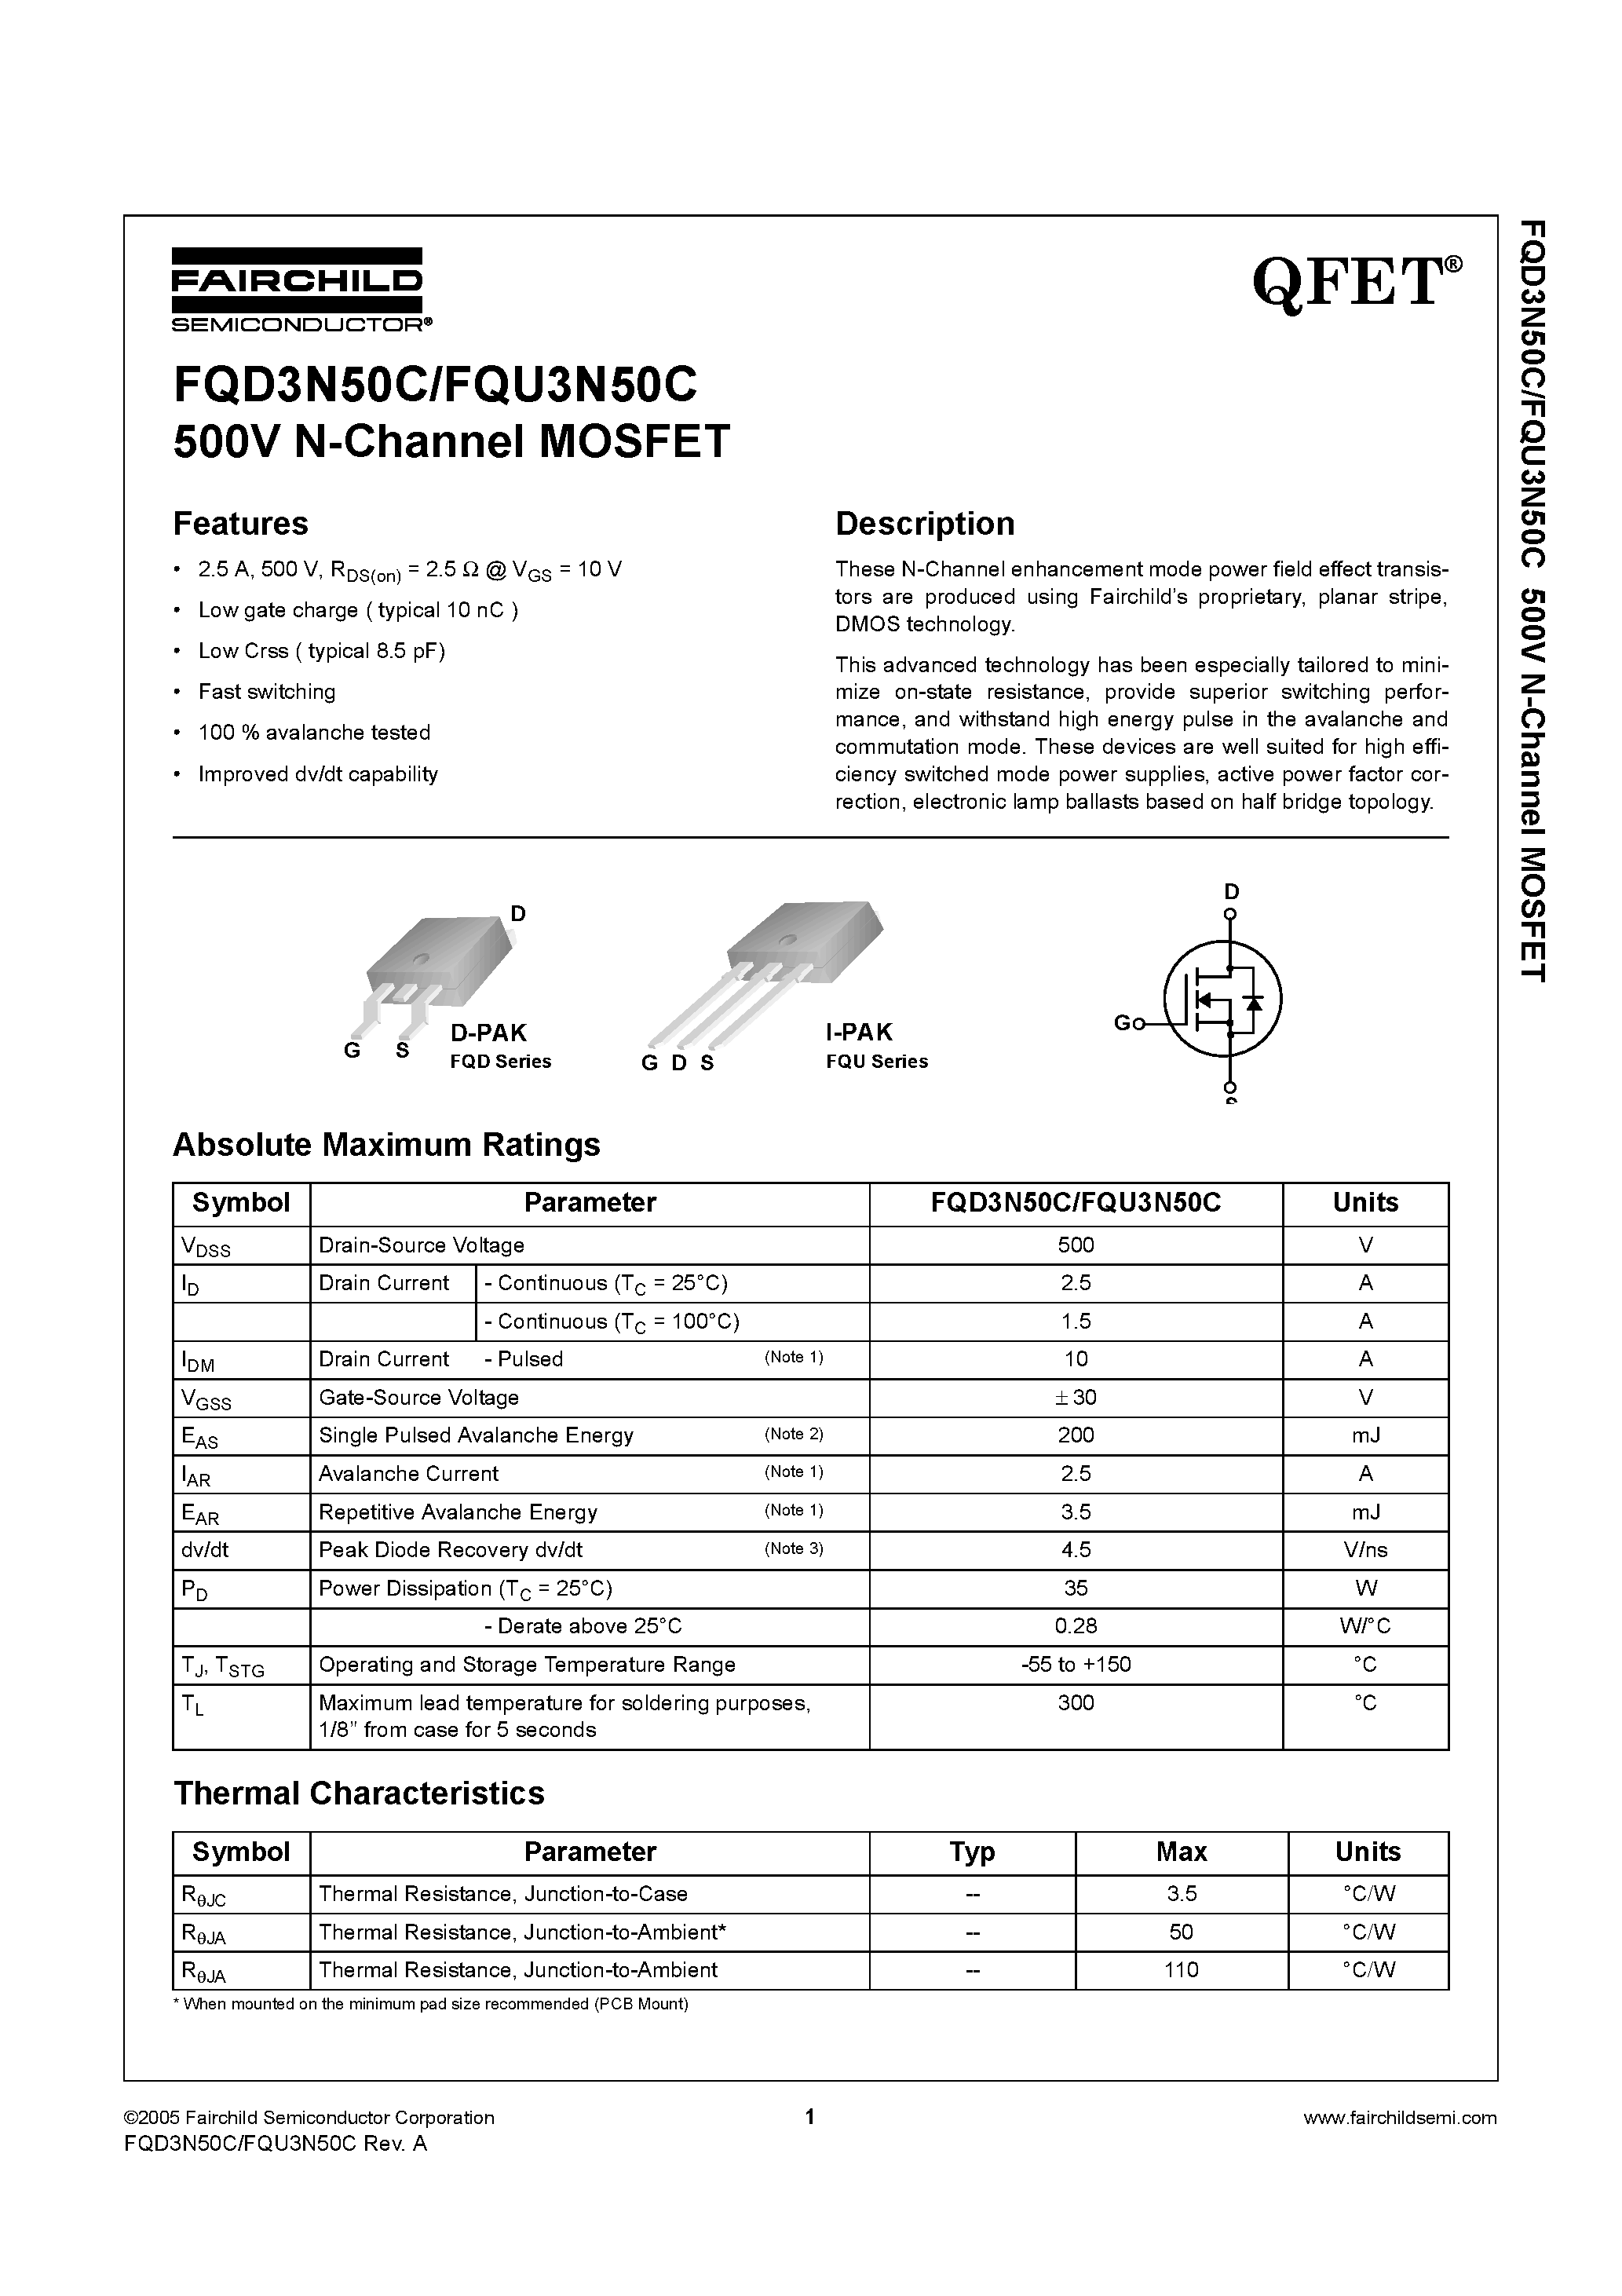 Datasheet FQD3N50C - 500V N-Channel MOSFET page 1